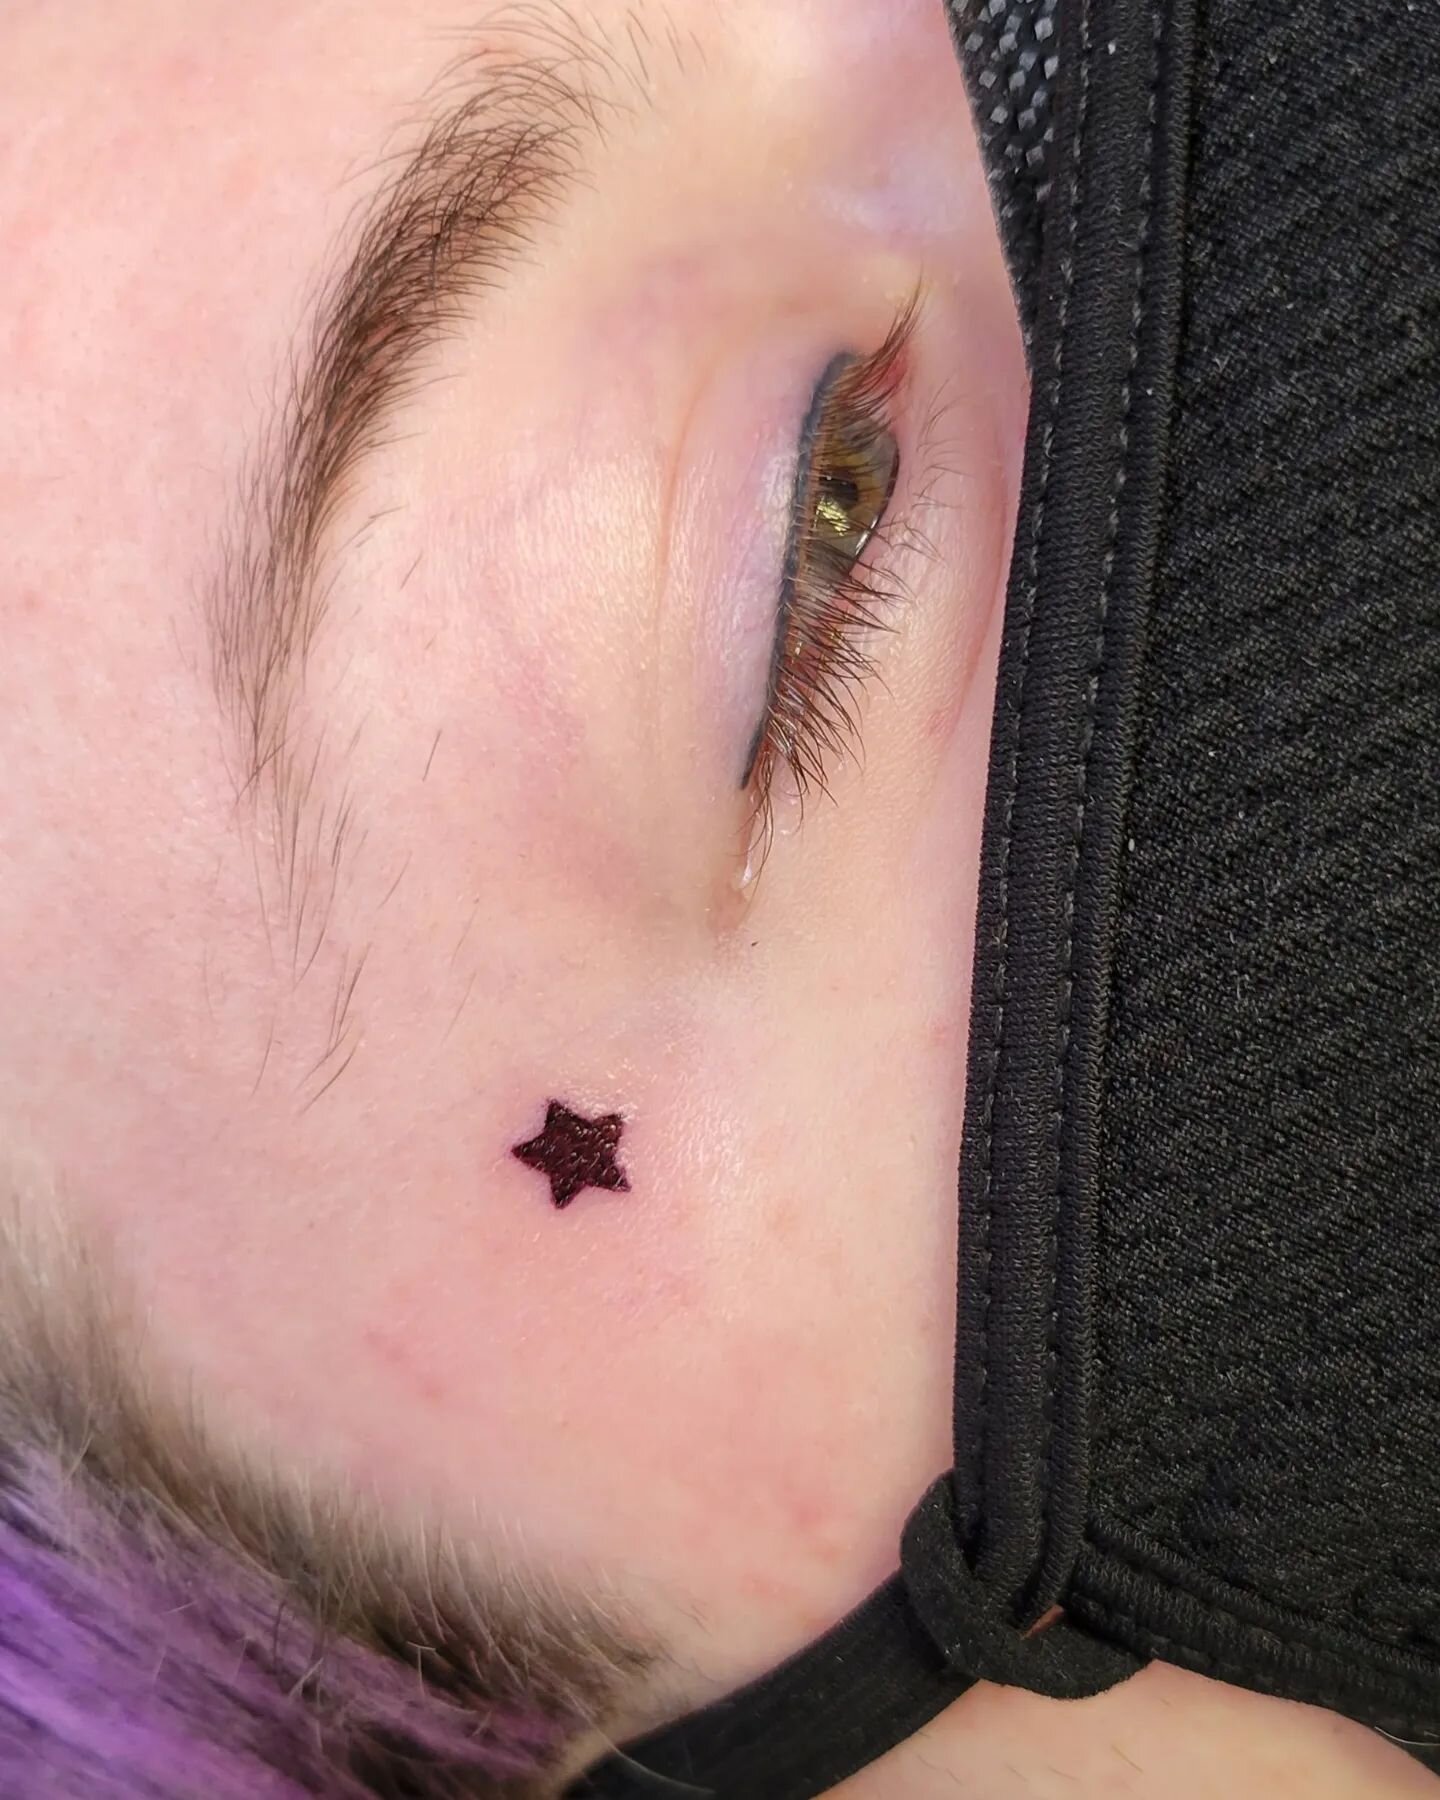 Cute lil star ⭐ next to healed eyeliner done by @velmatattoos for @pandorasacres !